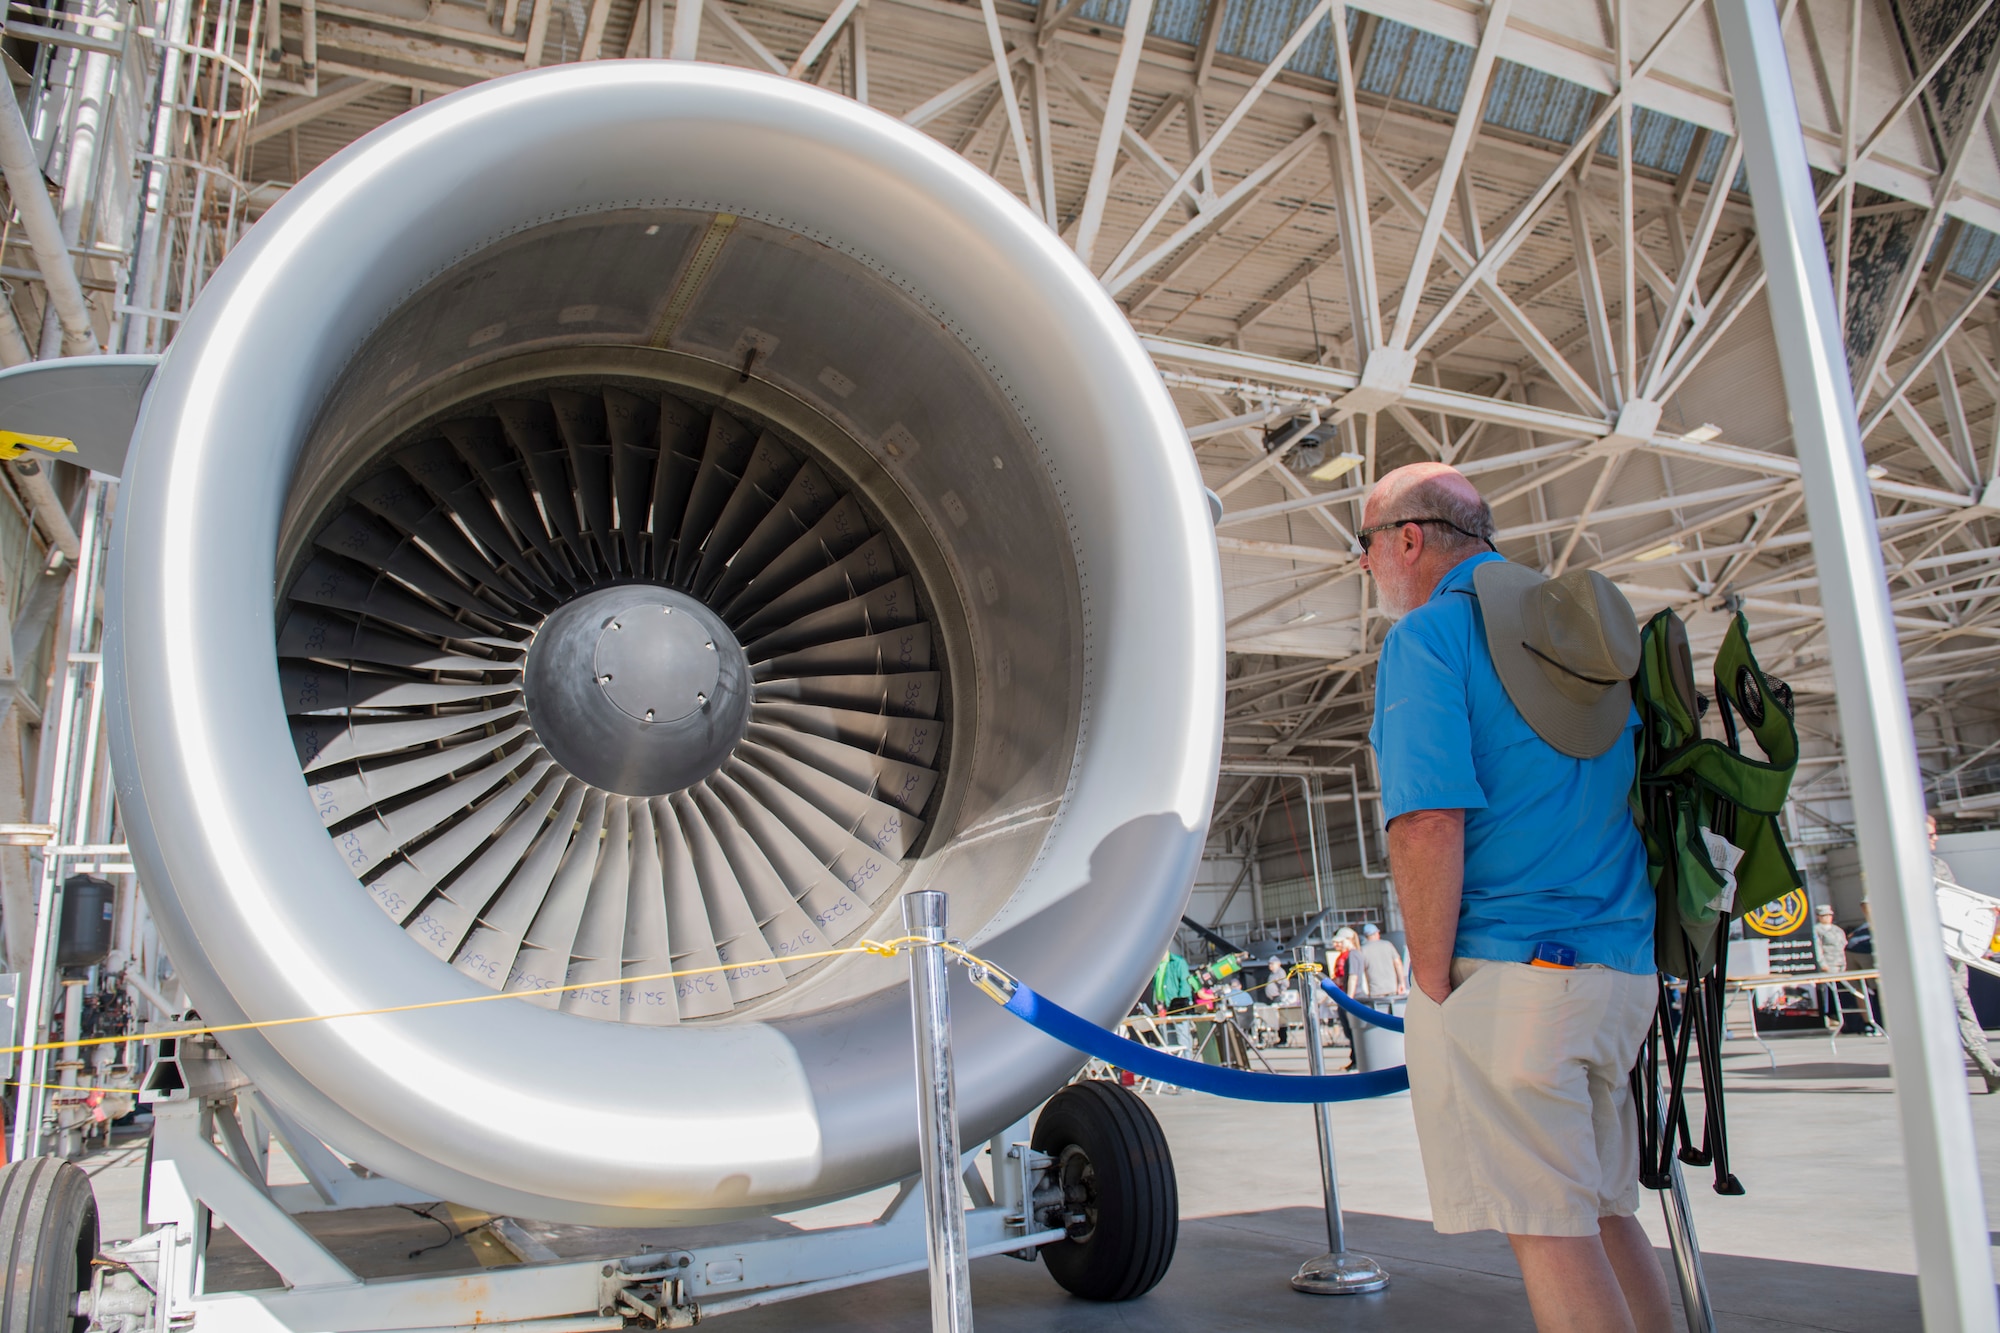 An attendee looks at an aerospace propulsion exhibit during the Joint Base Charleston Air and Space Expo at JB Charleston, S.C.  Apr 28, 2018.